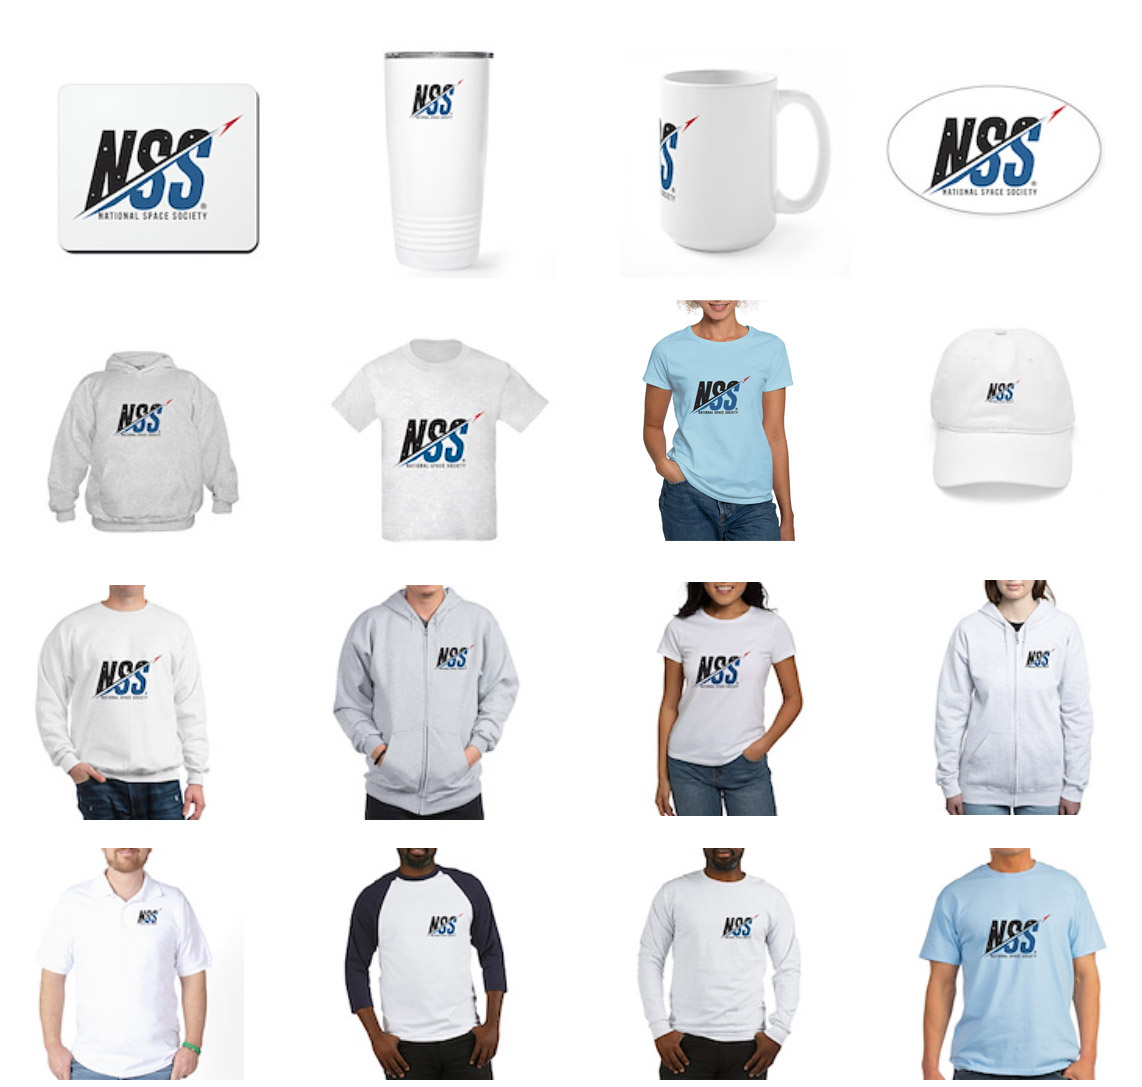 NSS Cafepress products